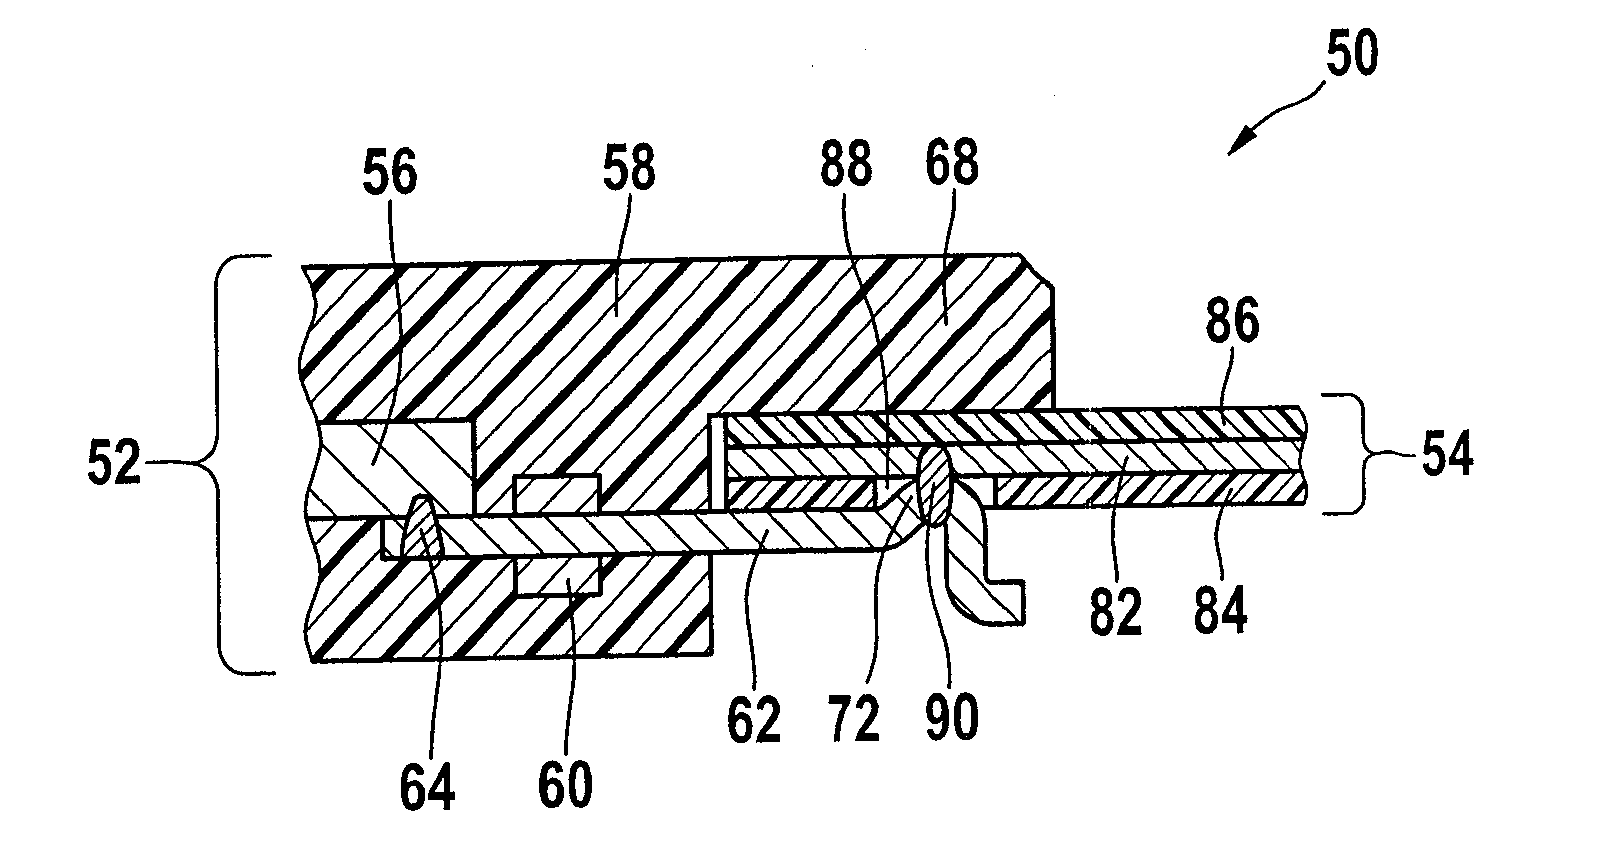 Electrical connection assembly for contacting electronic module